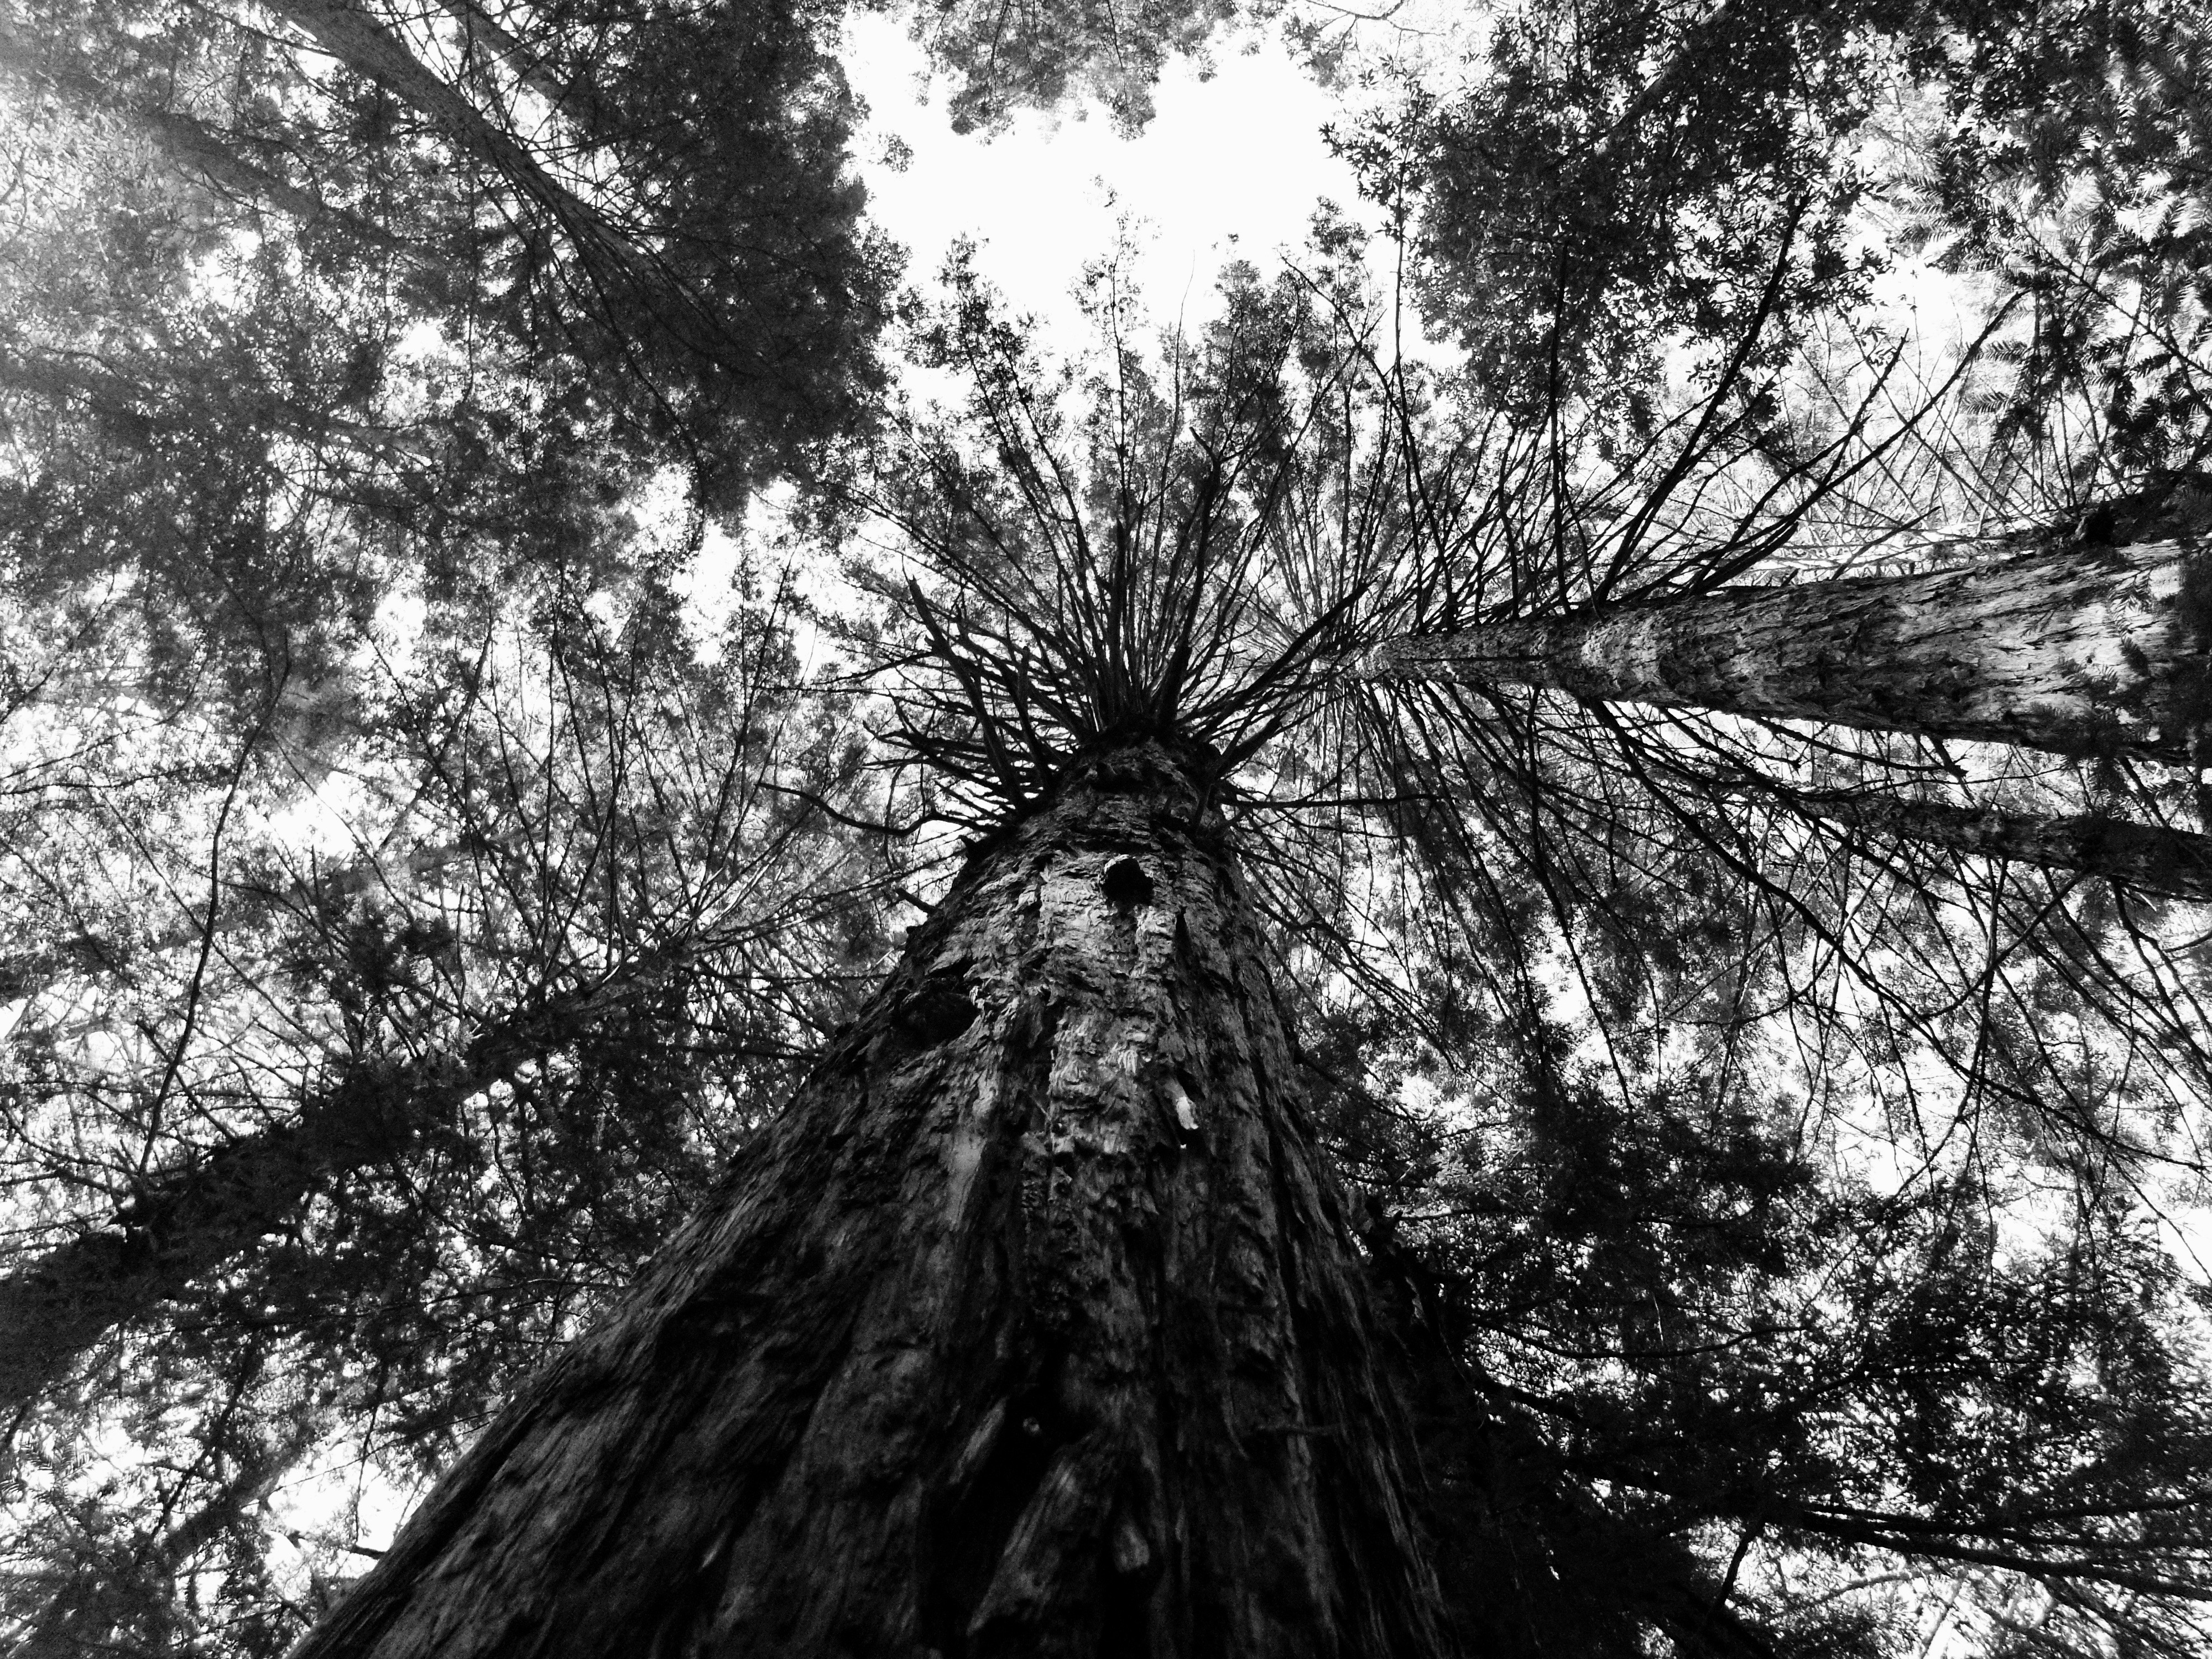 Thundering trees in muir woods, black and white